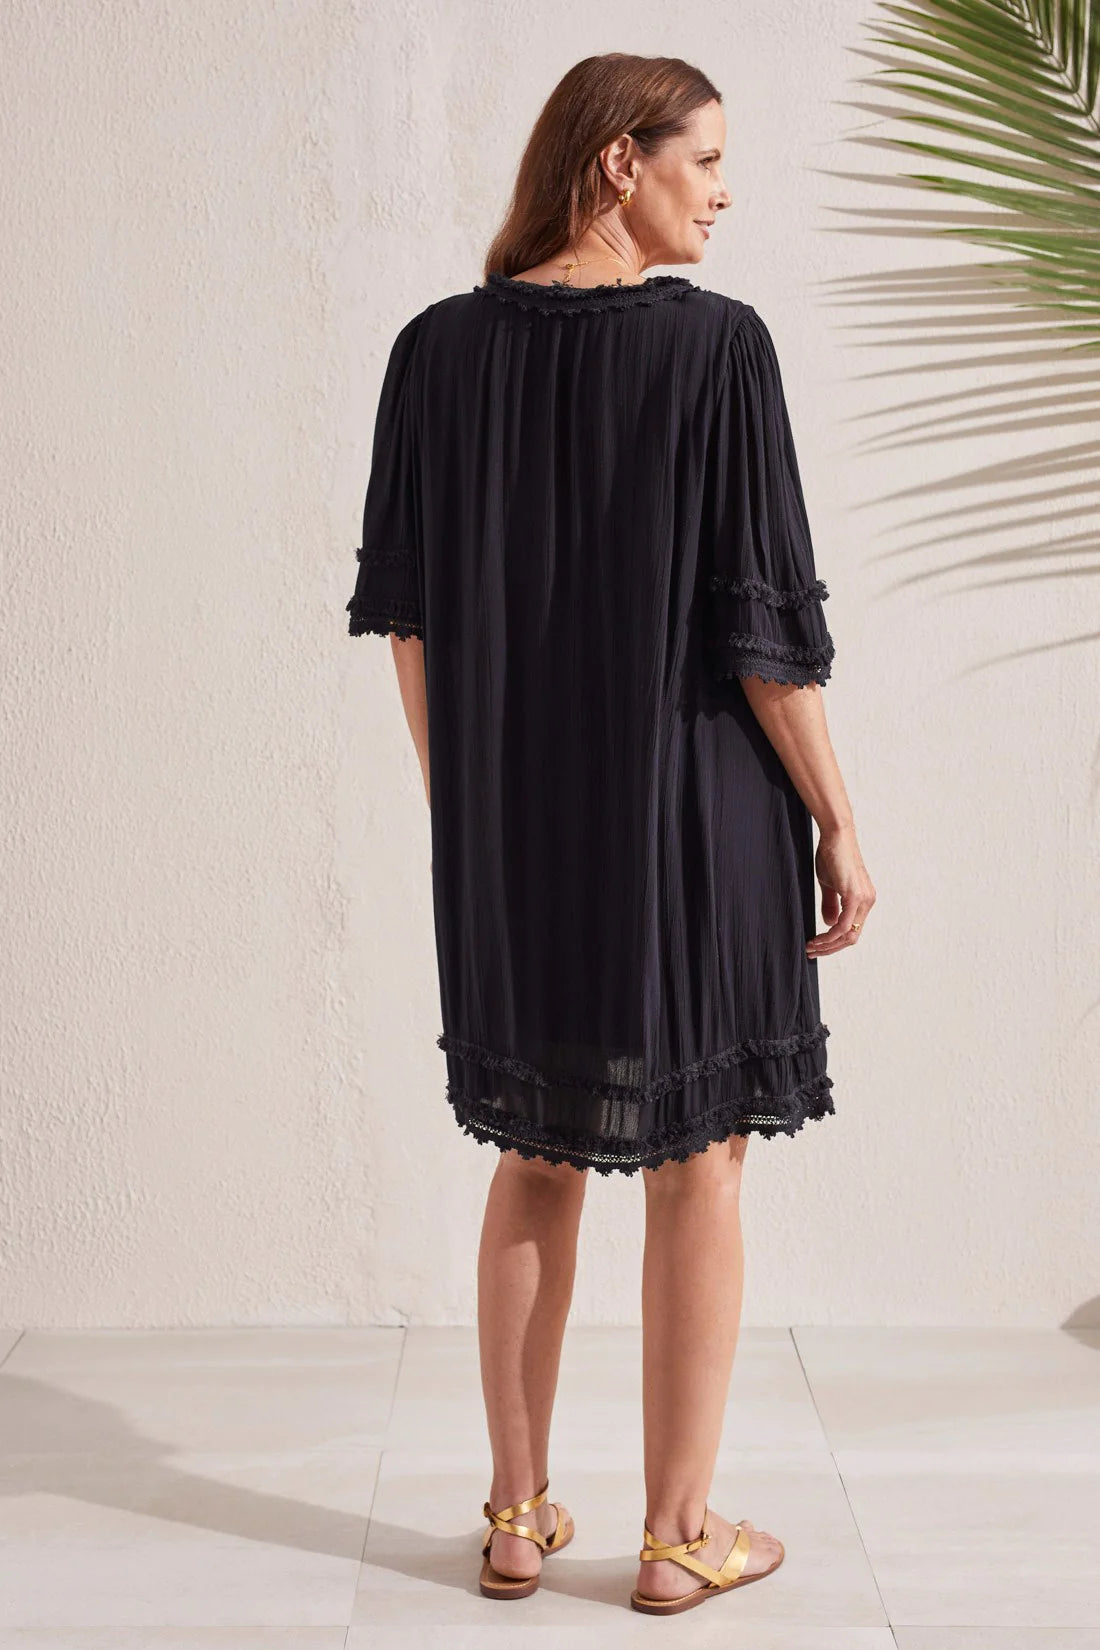 Step into beachy bohemian style with this flowy shift dress. We love the notch neck design, short sleeves, loose fit, woven crepe fabric, and decorative crochet trim that outlines the look.